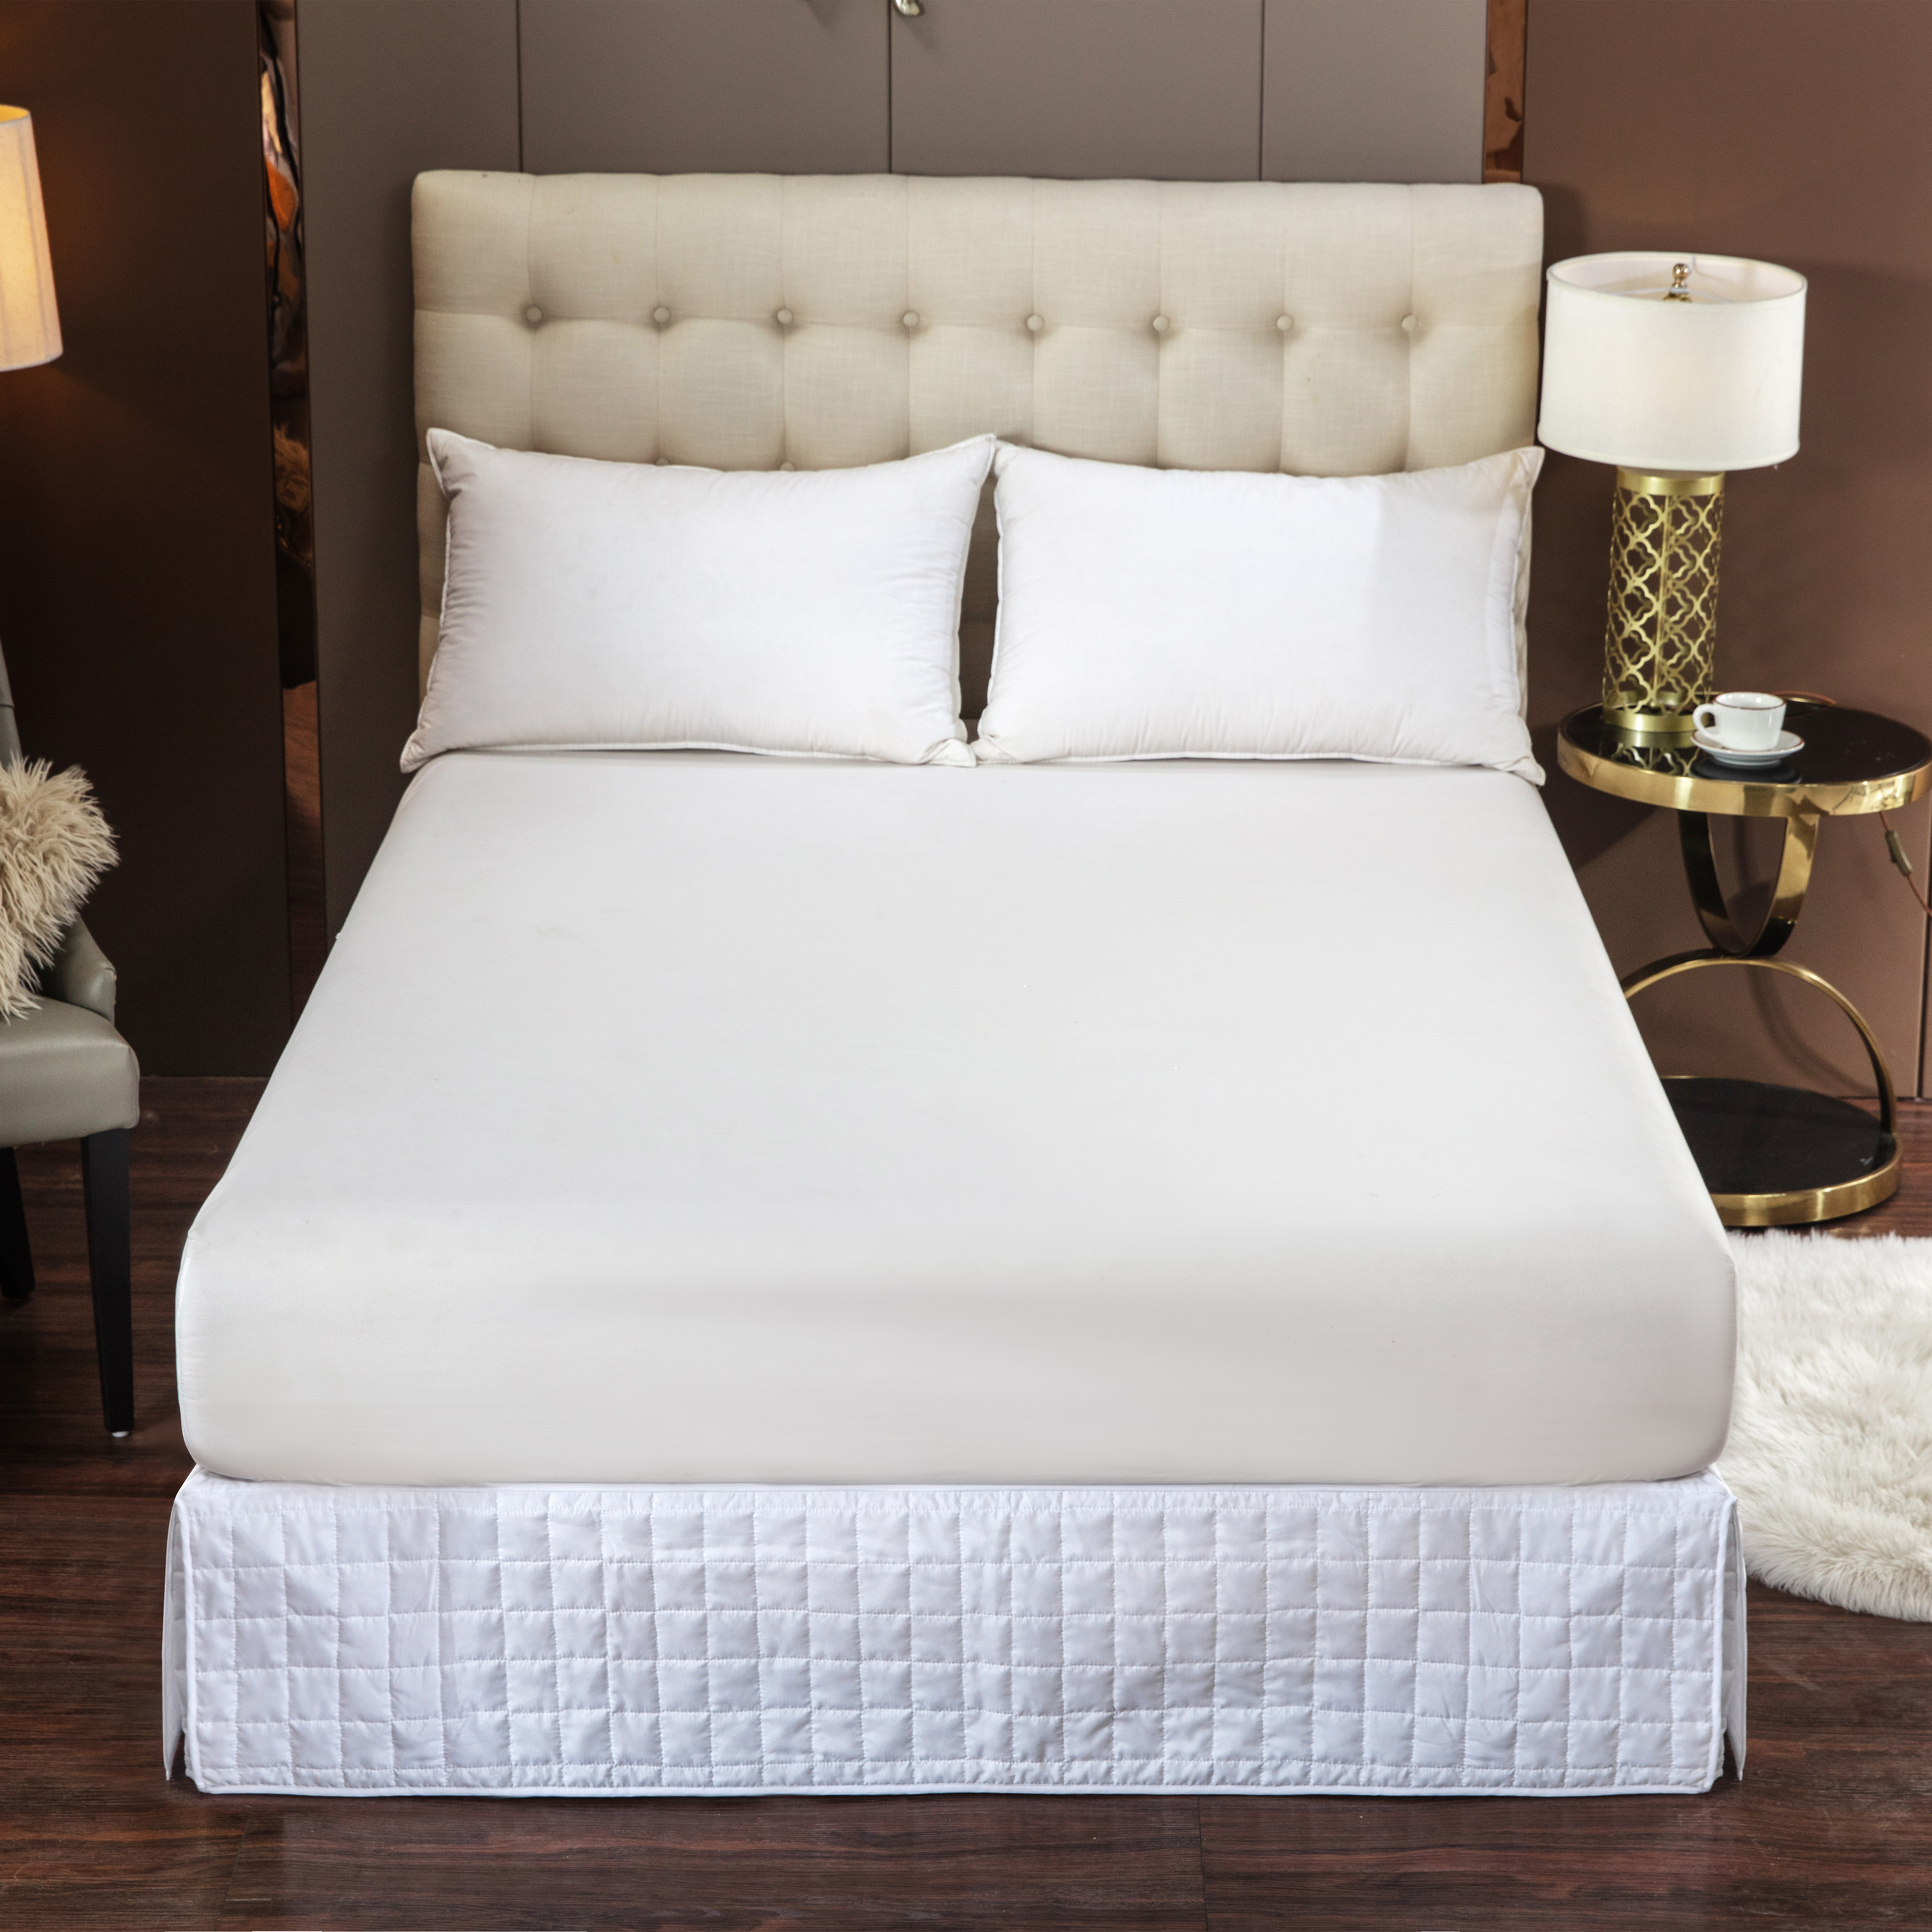 Quilted White beautiful bed skirt make your bed and bedding room beauty Featured Image